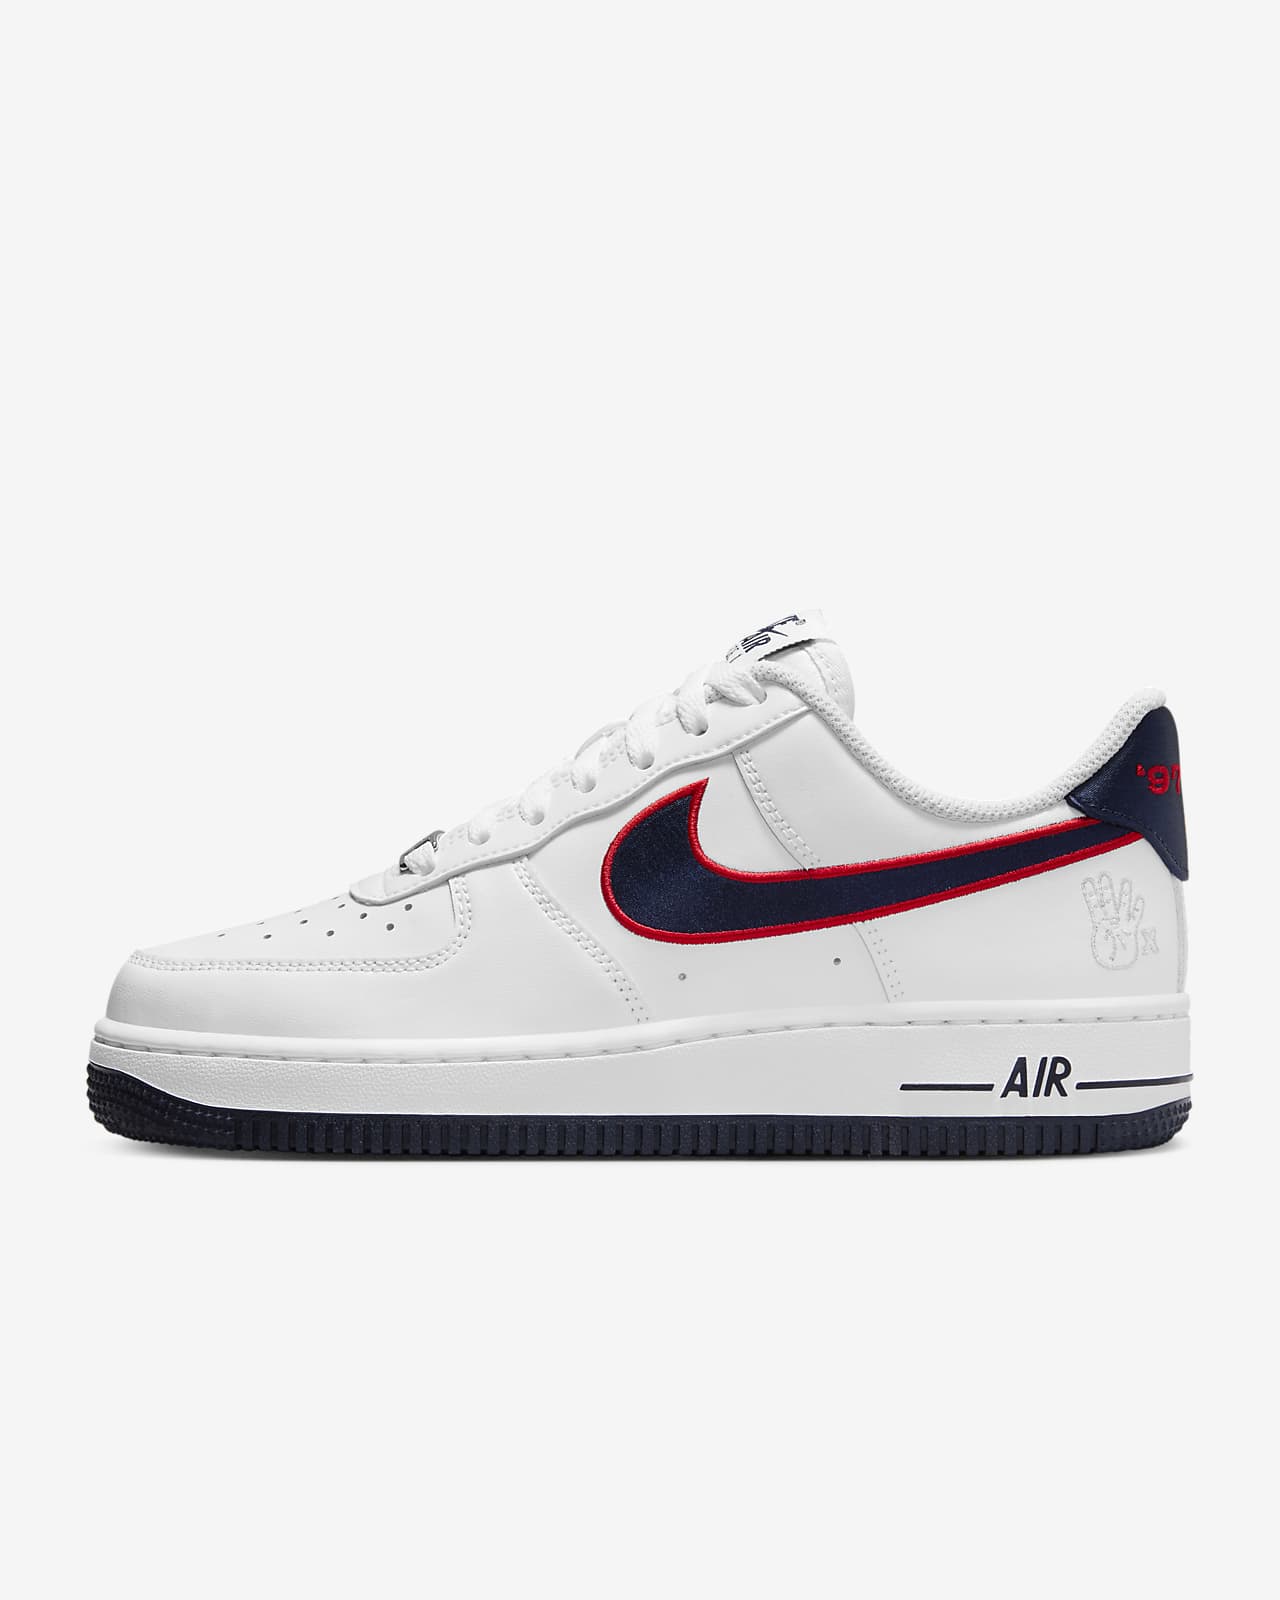 Nike Air Force 1 '07 Mid Women's Shoes Size - 8.5